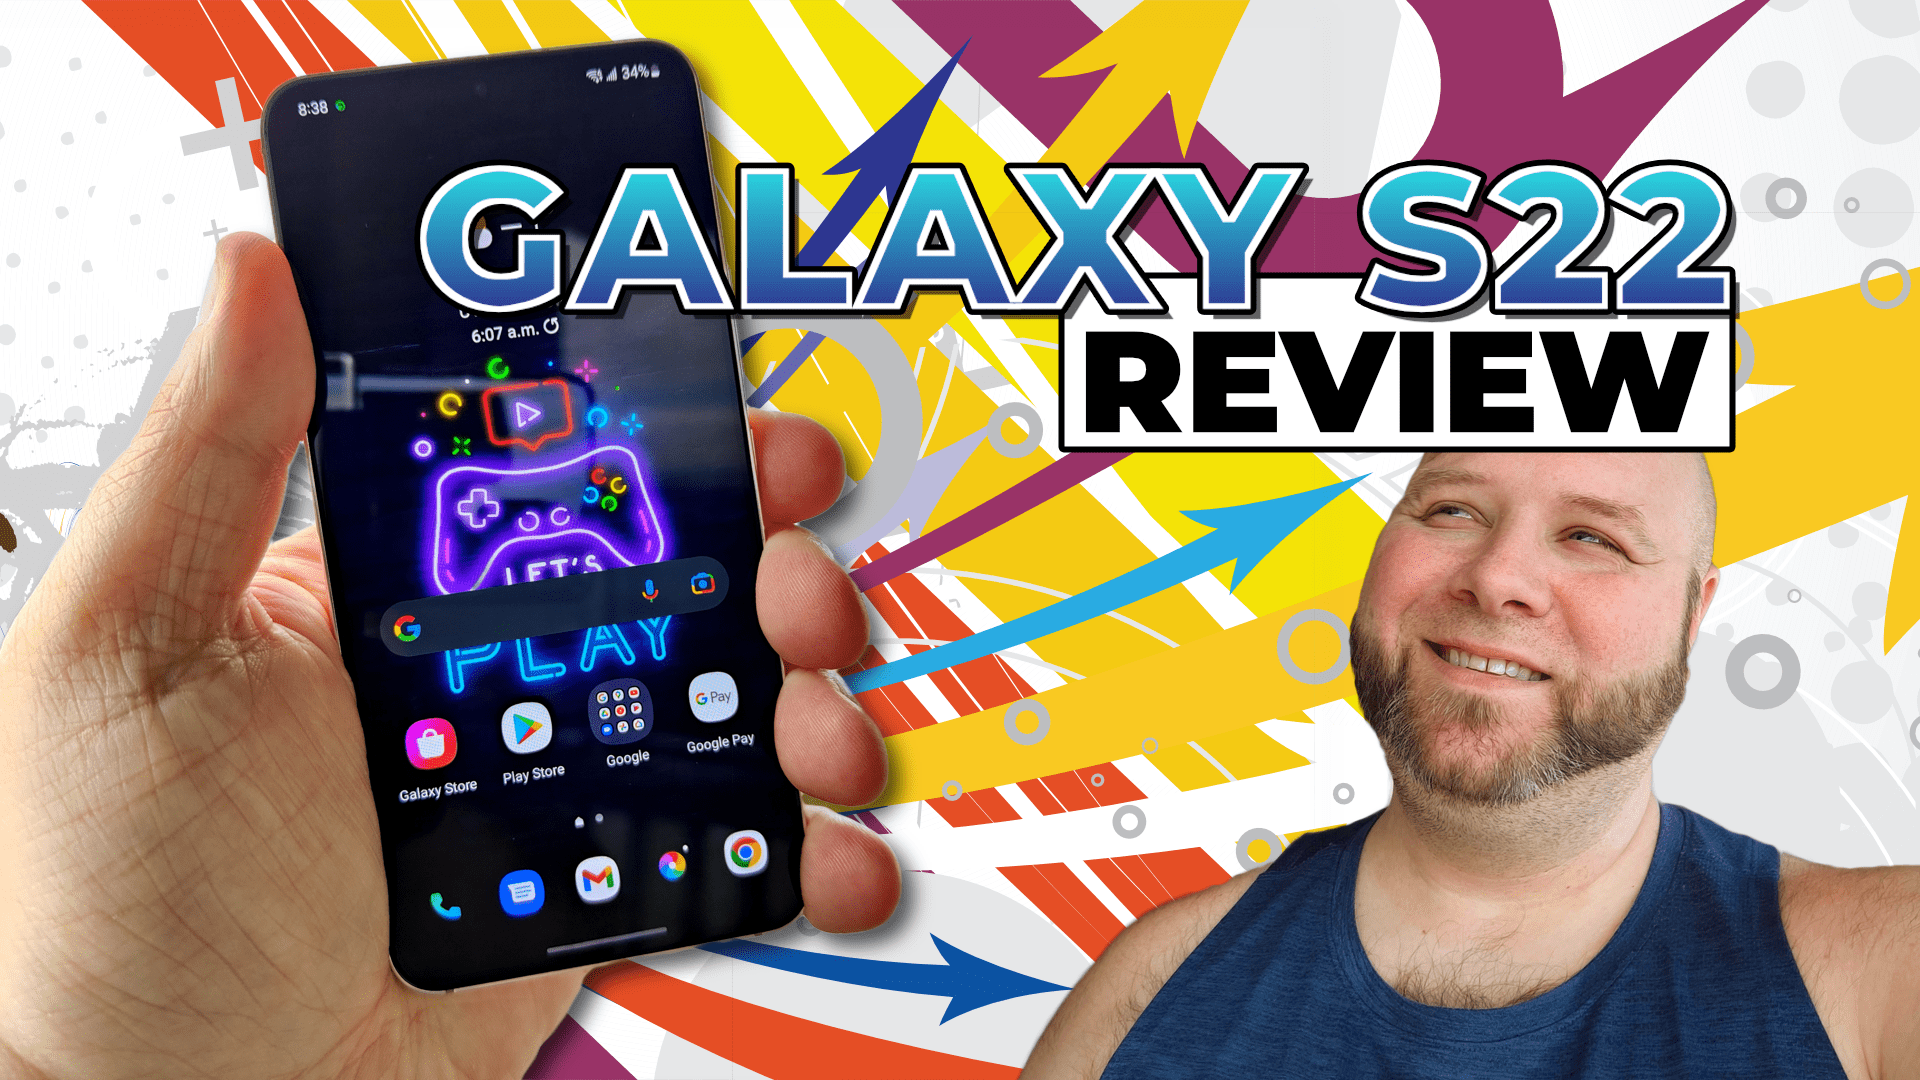 Galaxy S22 Review: Top Android Phone?